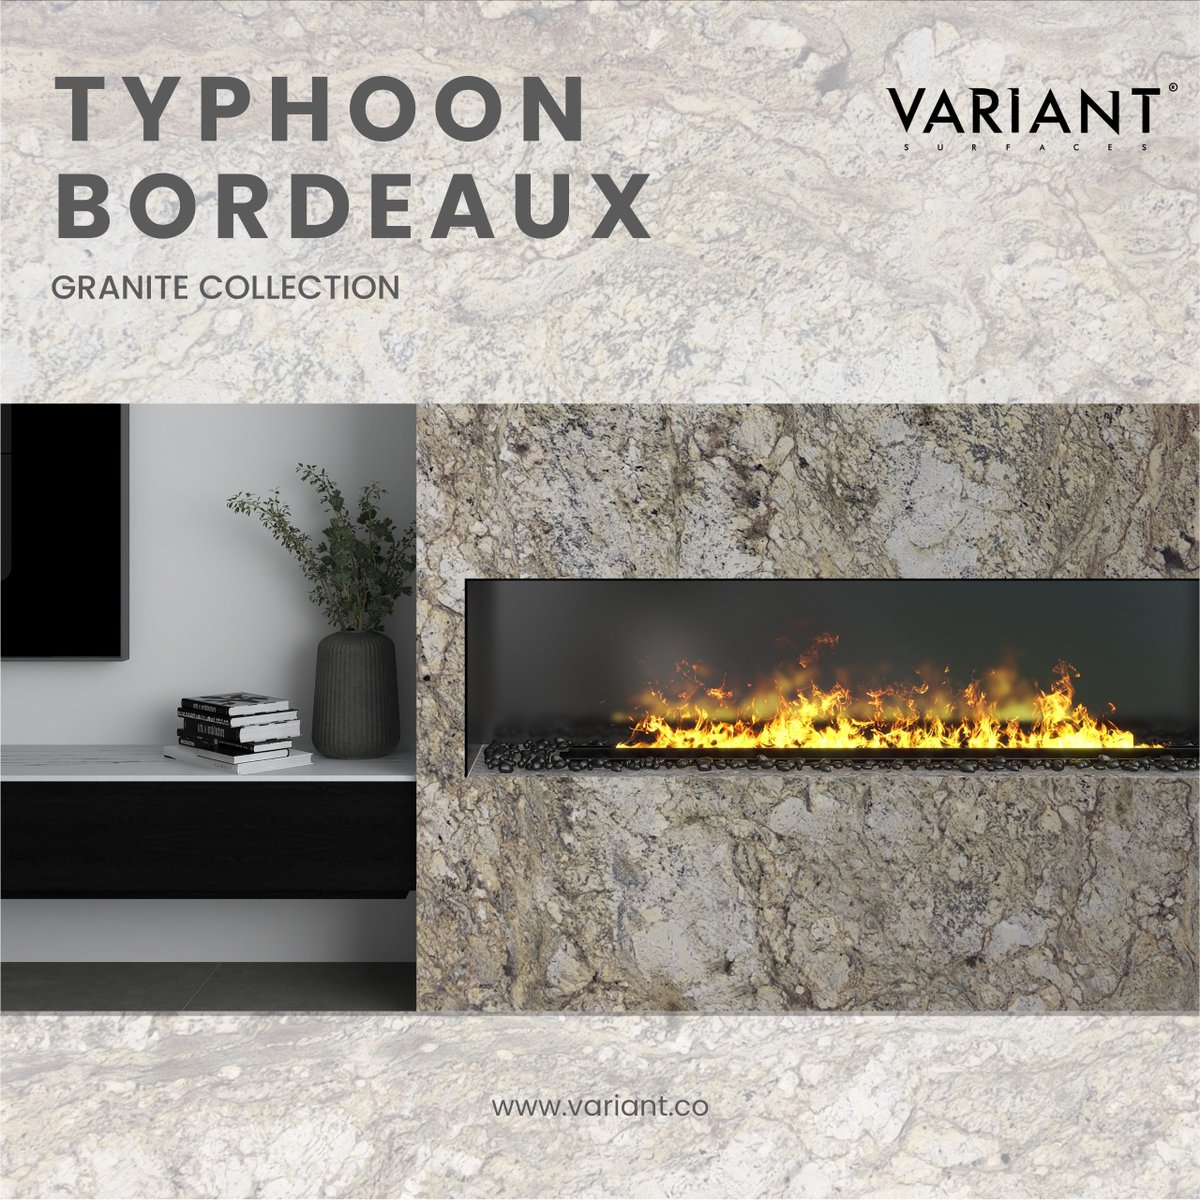 Add drama to your #interiorstyle with Typhoon Bordeaux granite! 

This stunning #naturalstone elevates #interiors with unique colors and functionality, perfect for #countertops #vanities #walls and more.

#countertops #granitecountertops #interiors #homedecor #renovation